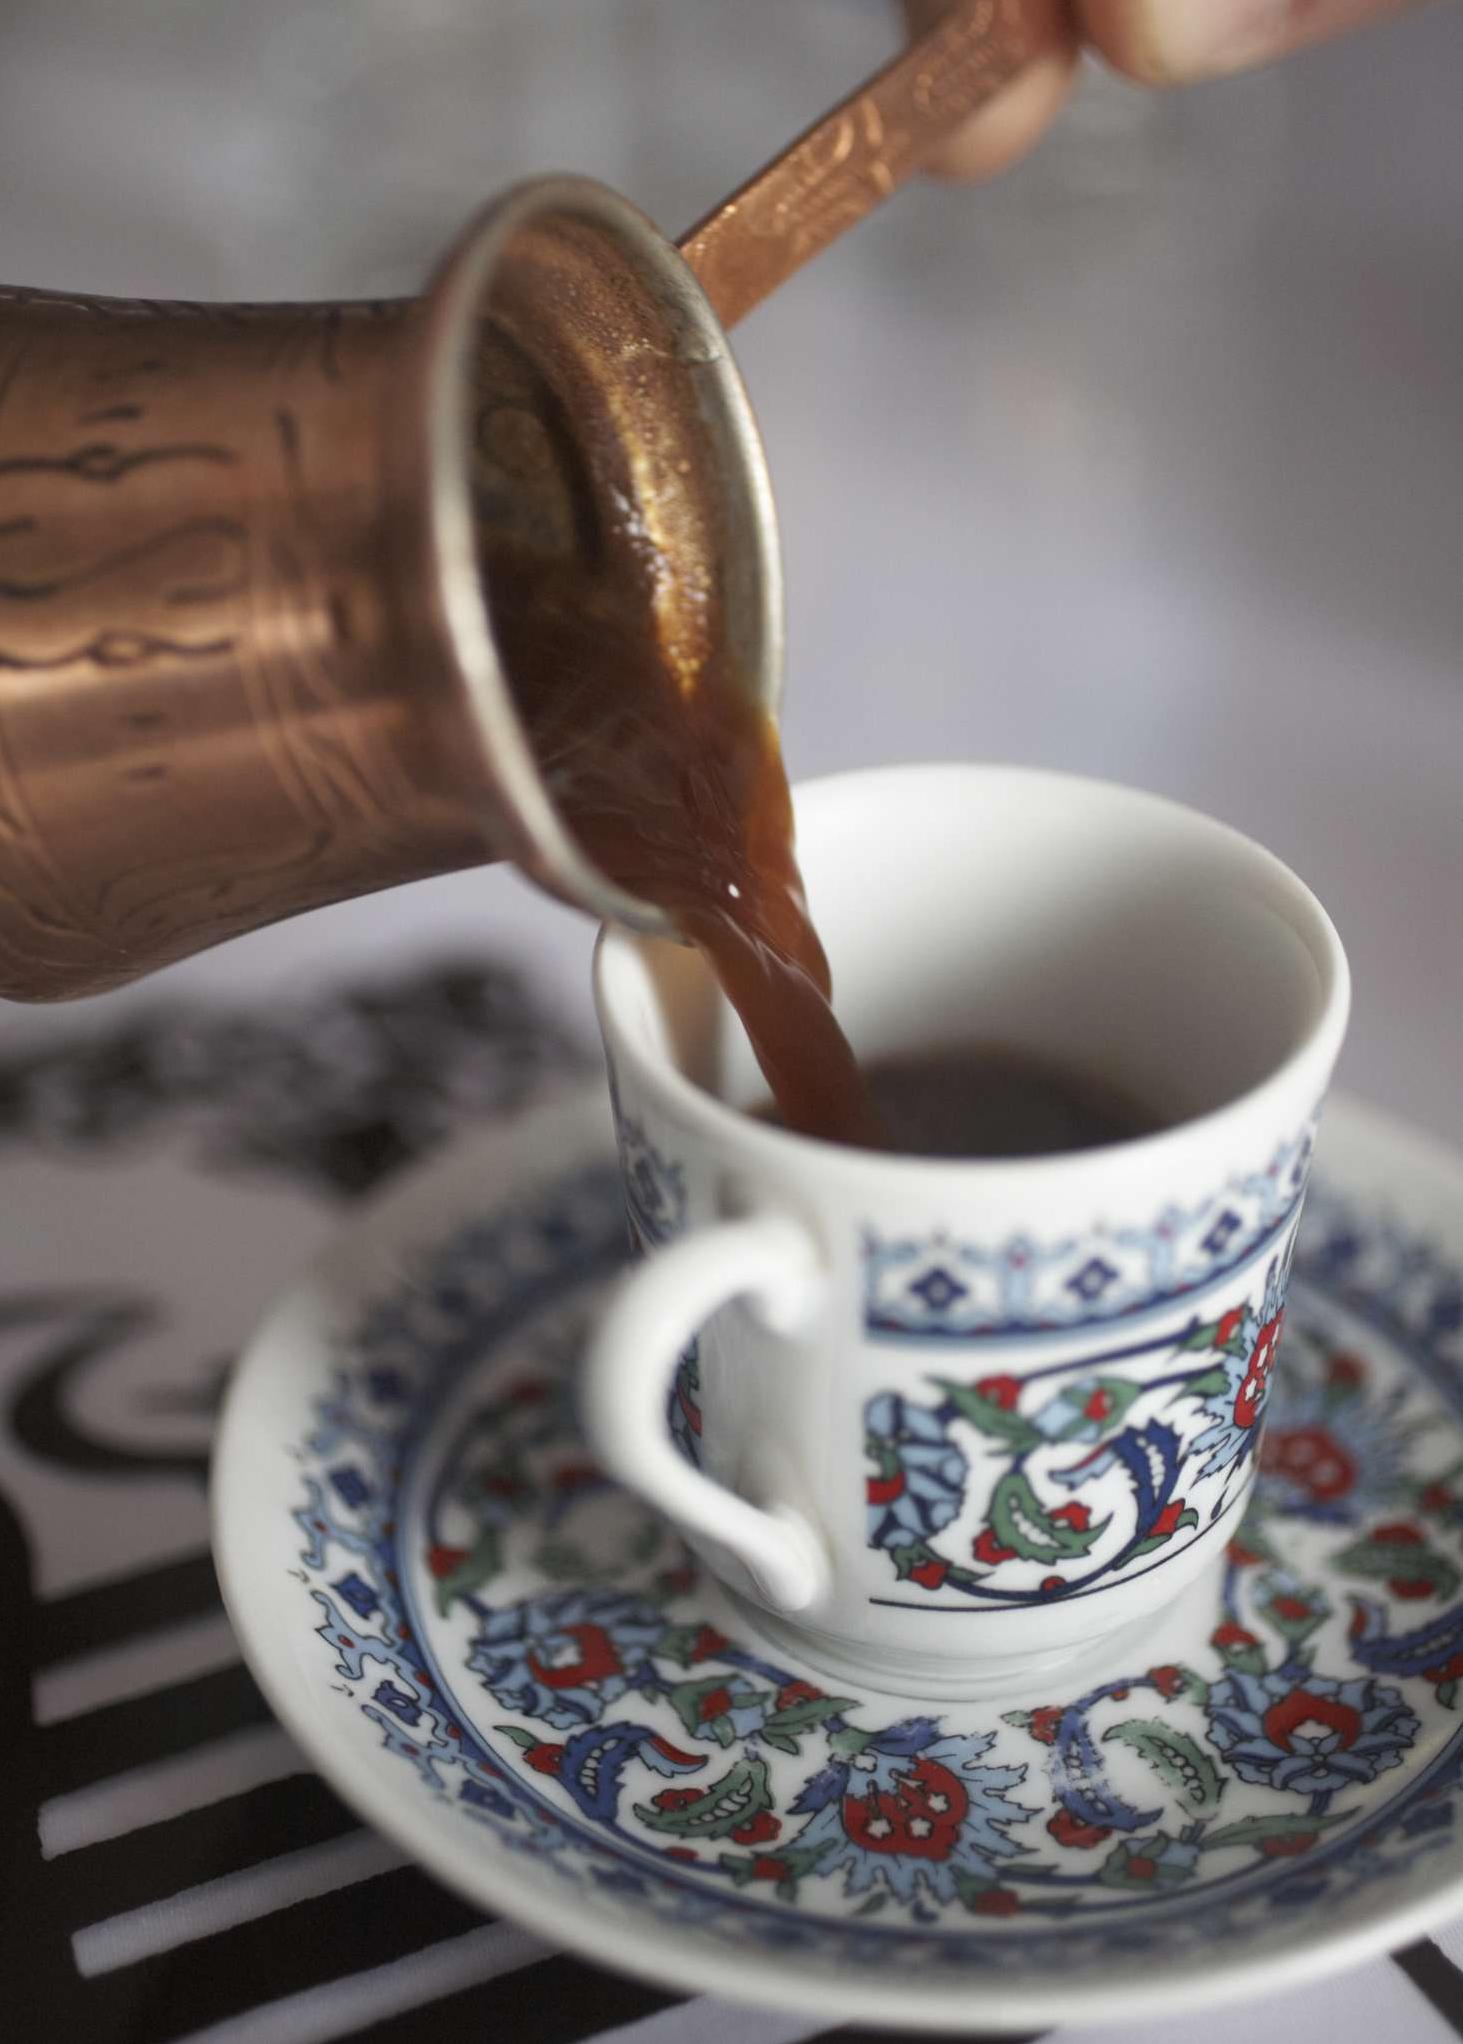  The art of brewing a cup of Turkish coffee